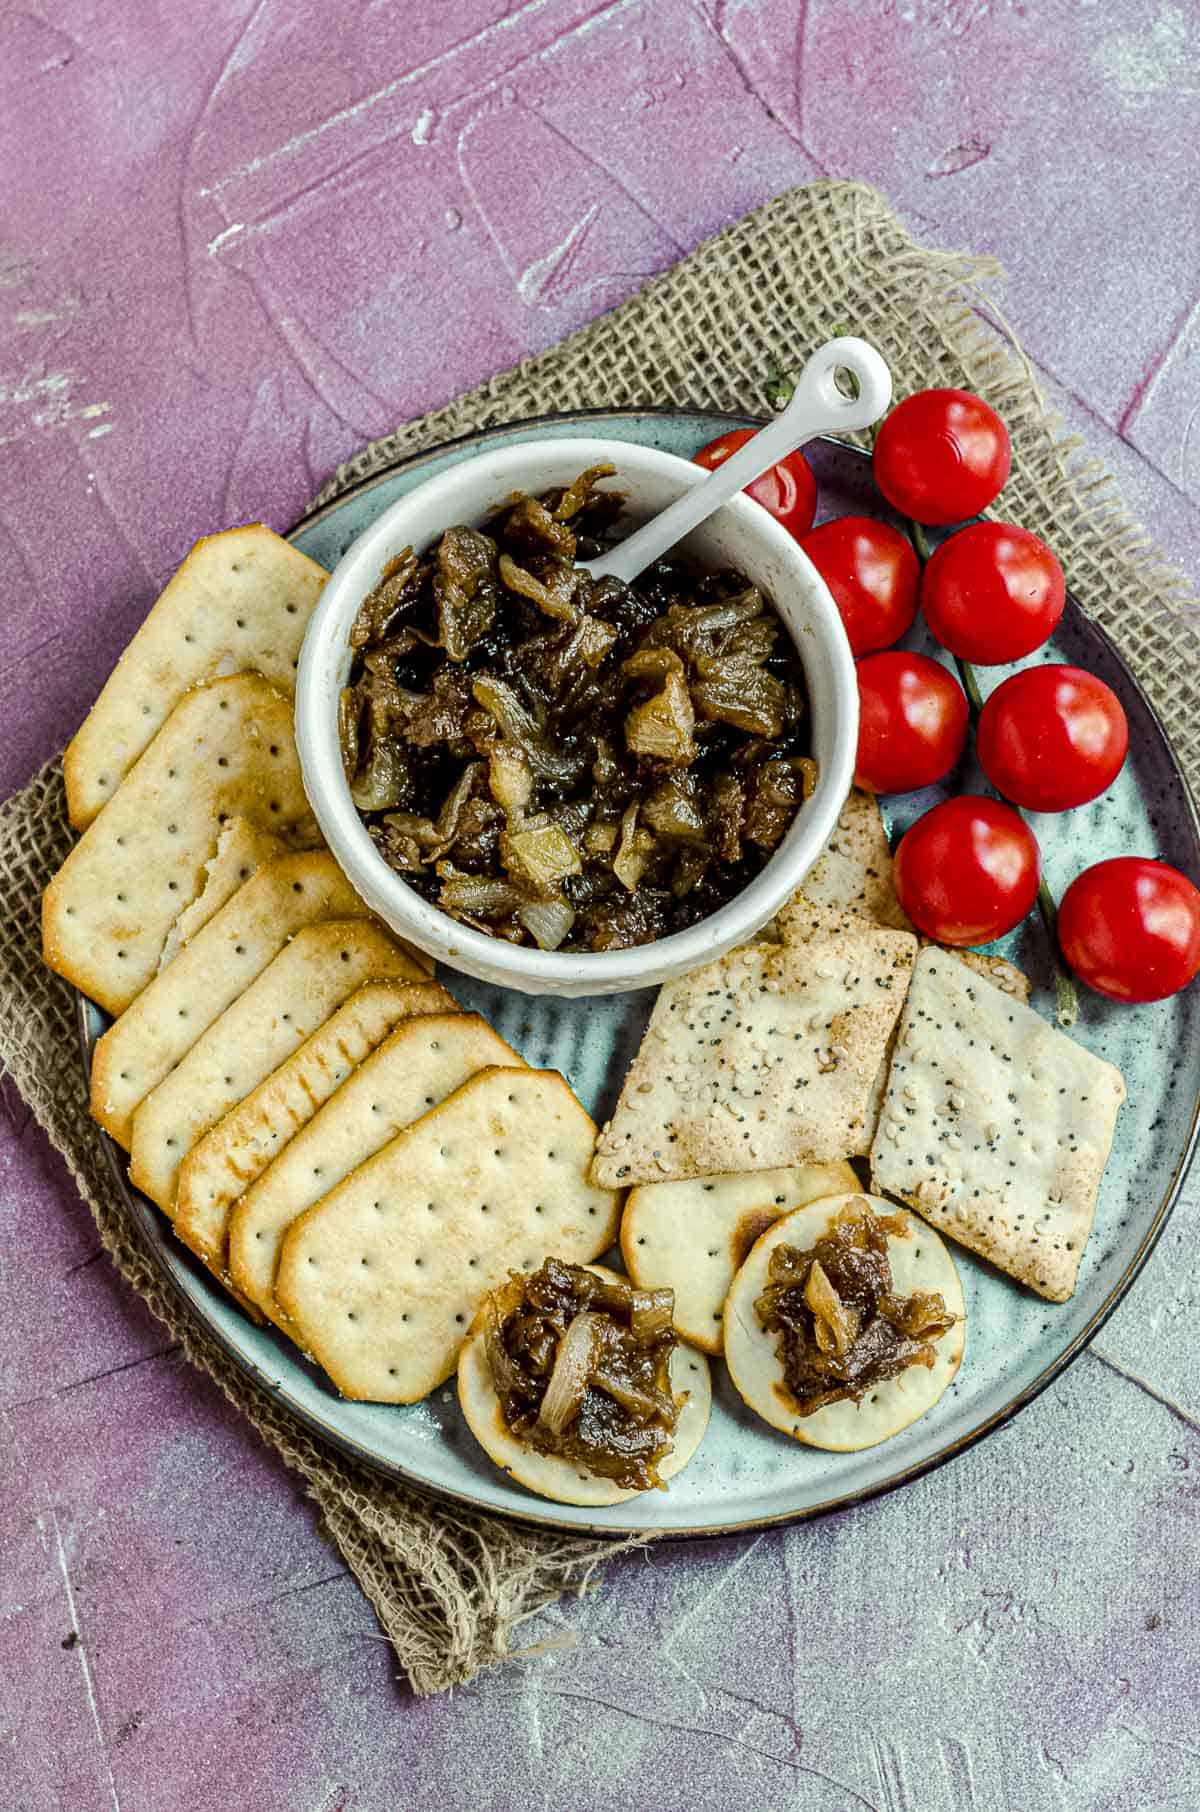 Overhead view of a bowl with apple onion chutney on a plate with some crackers and some cherry tomatoes